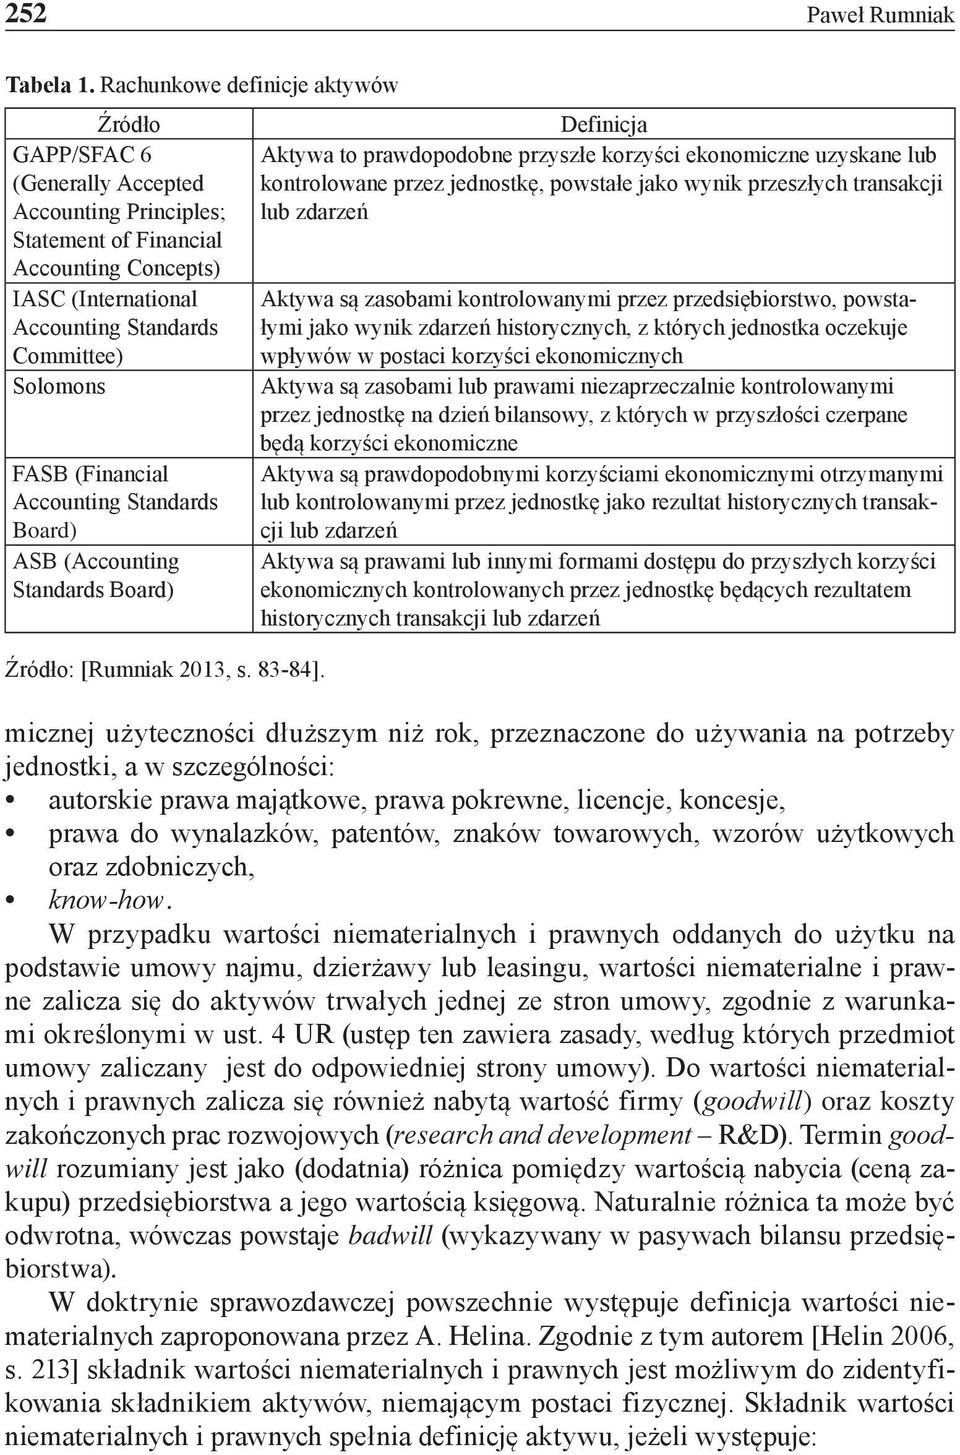 FASB (Financial Accounting Standards Board) ASB (Accounting Standards Board) Źródło: [Rumniak 2013, s. 83-84].